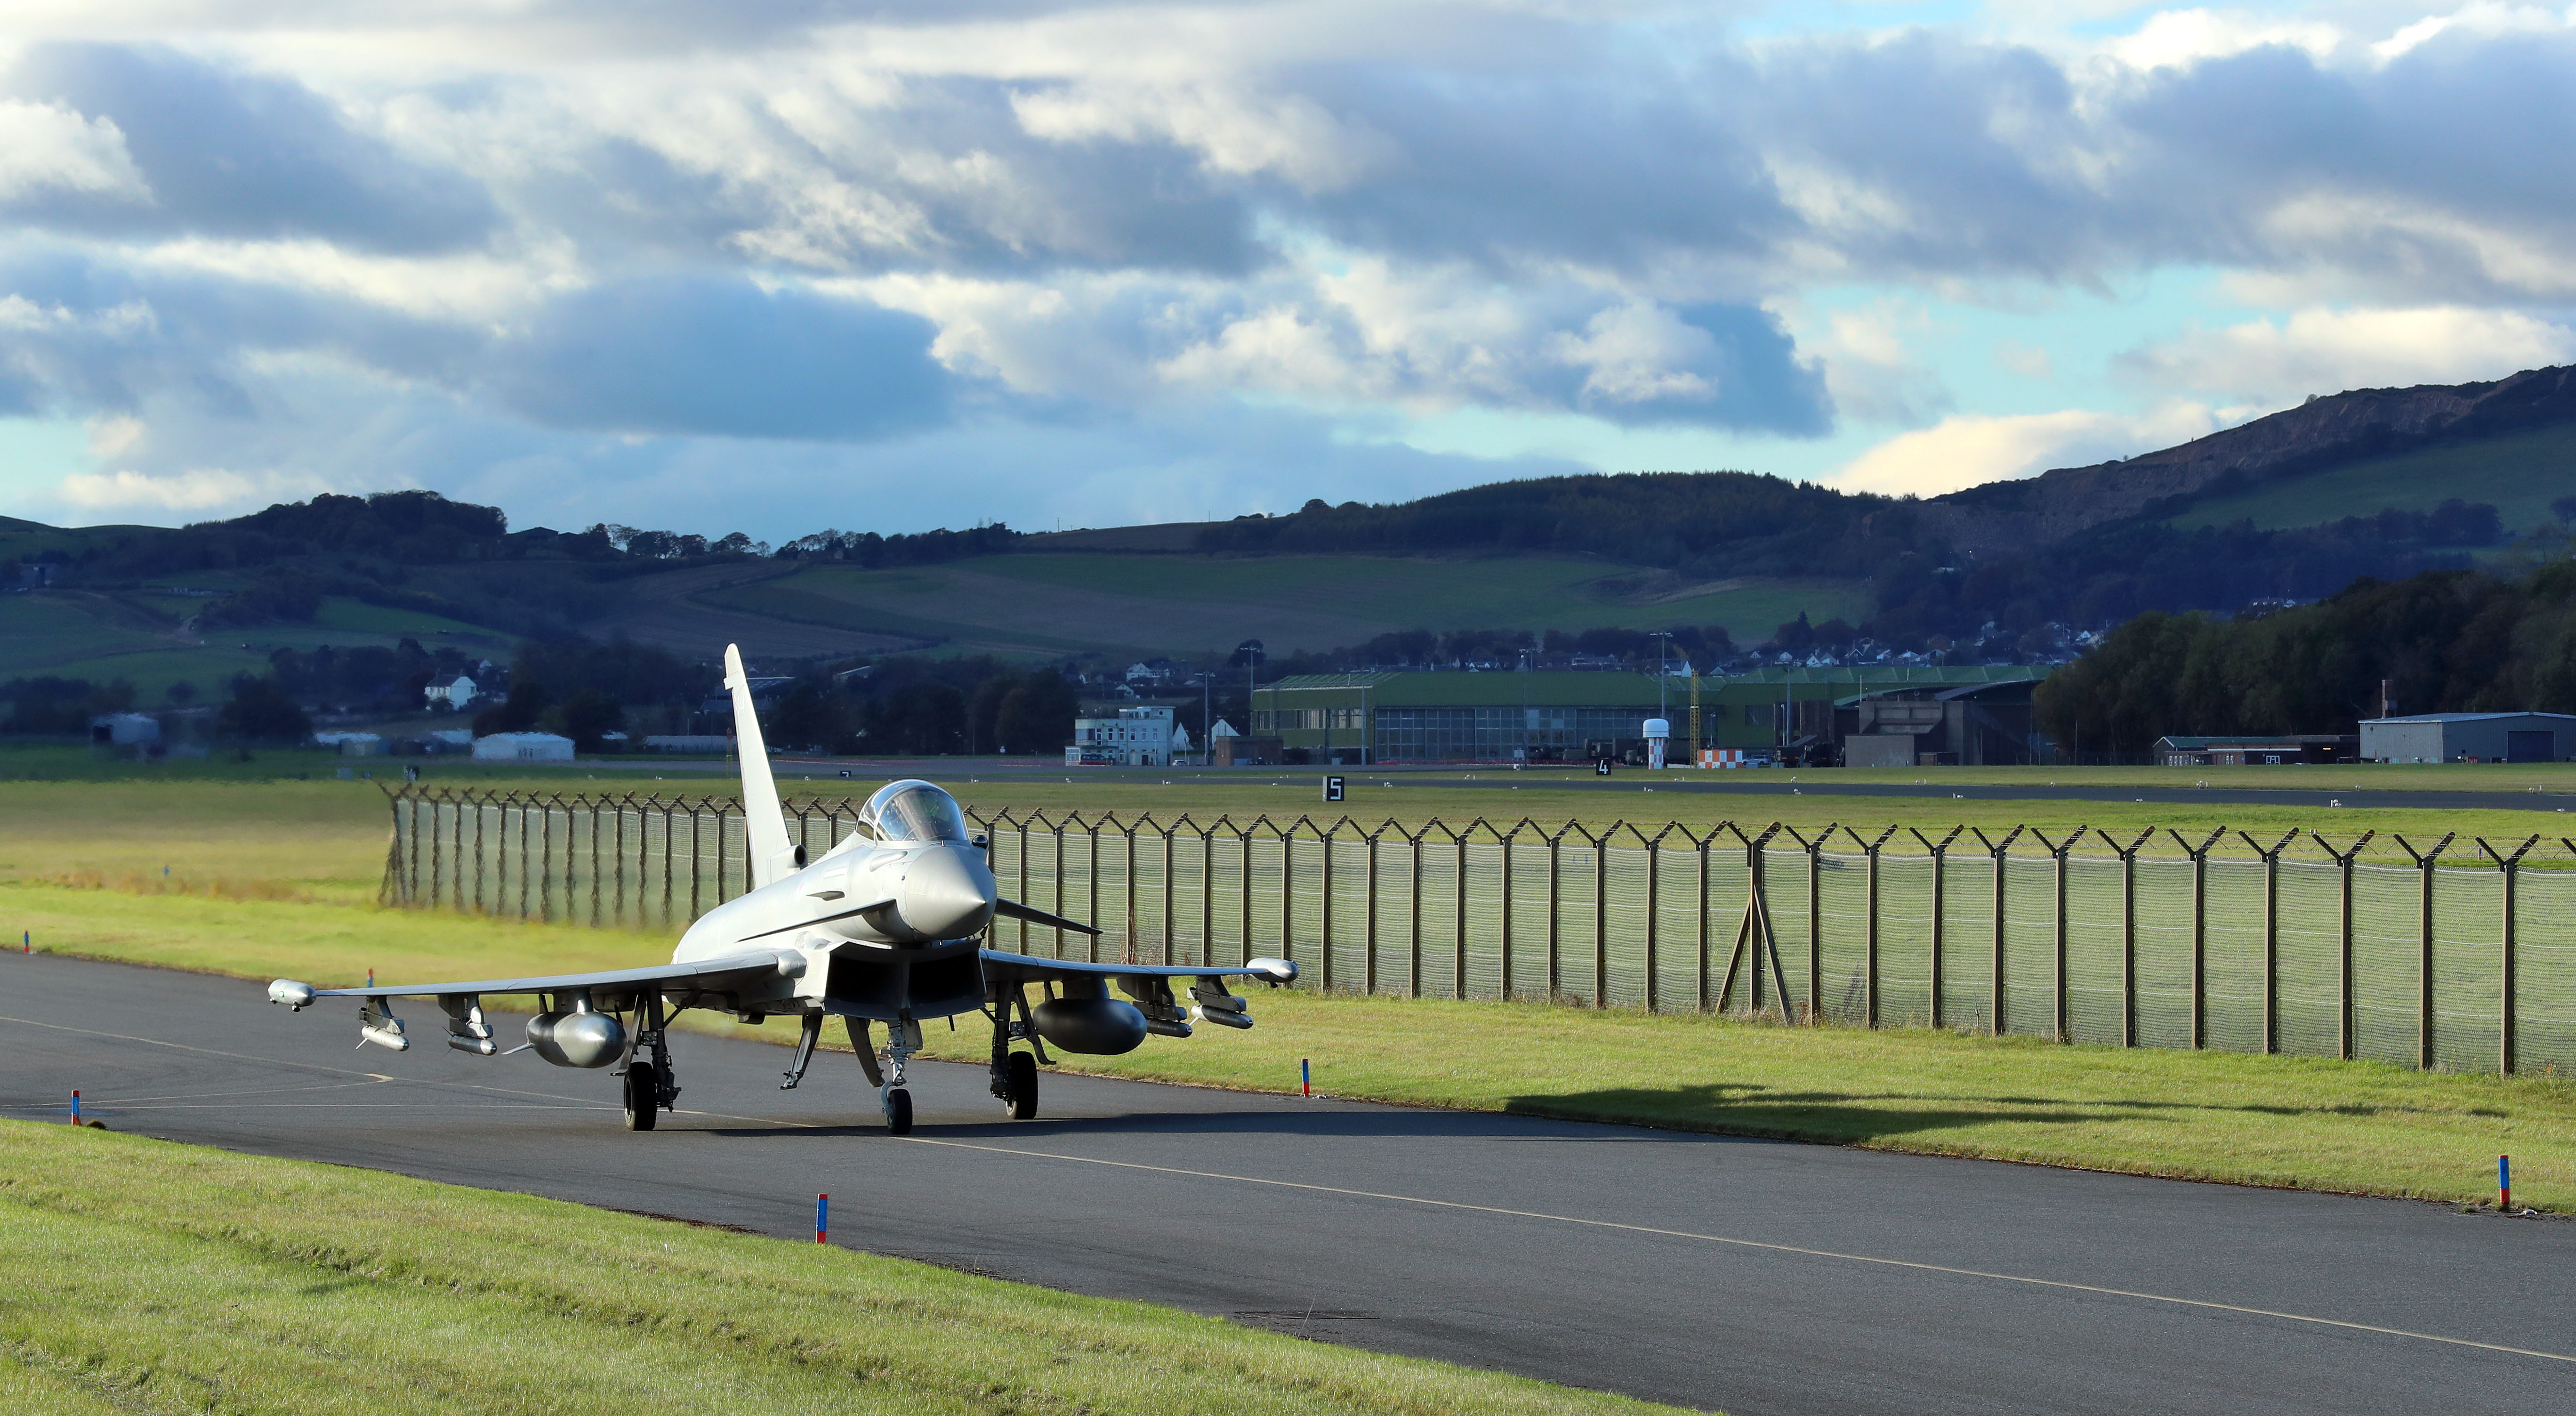 Typhoon about to take off from the runway.